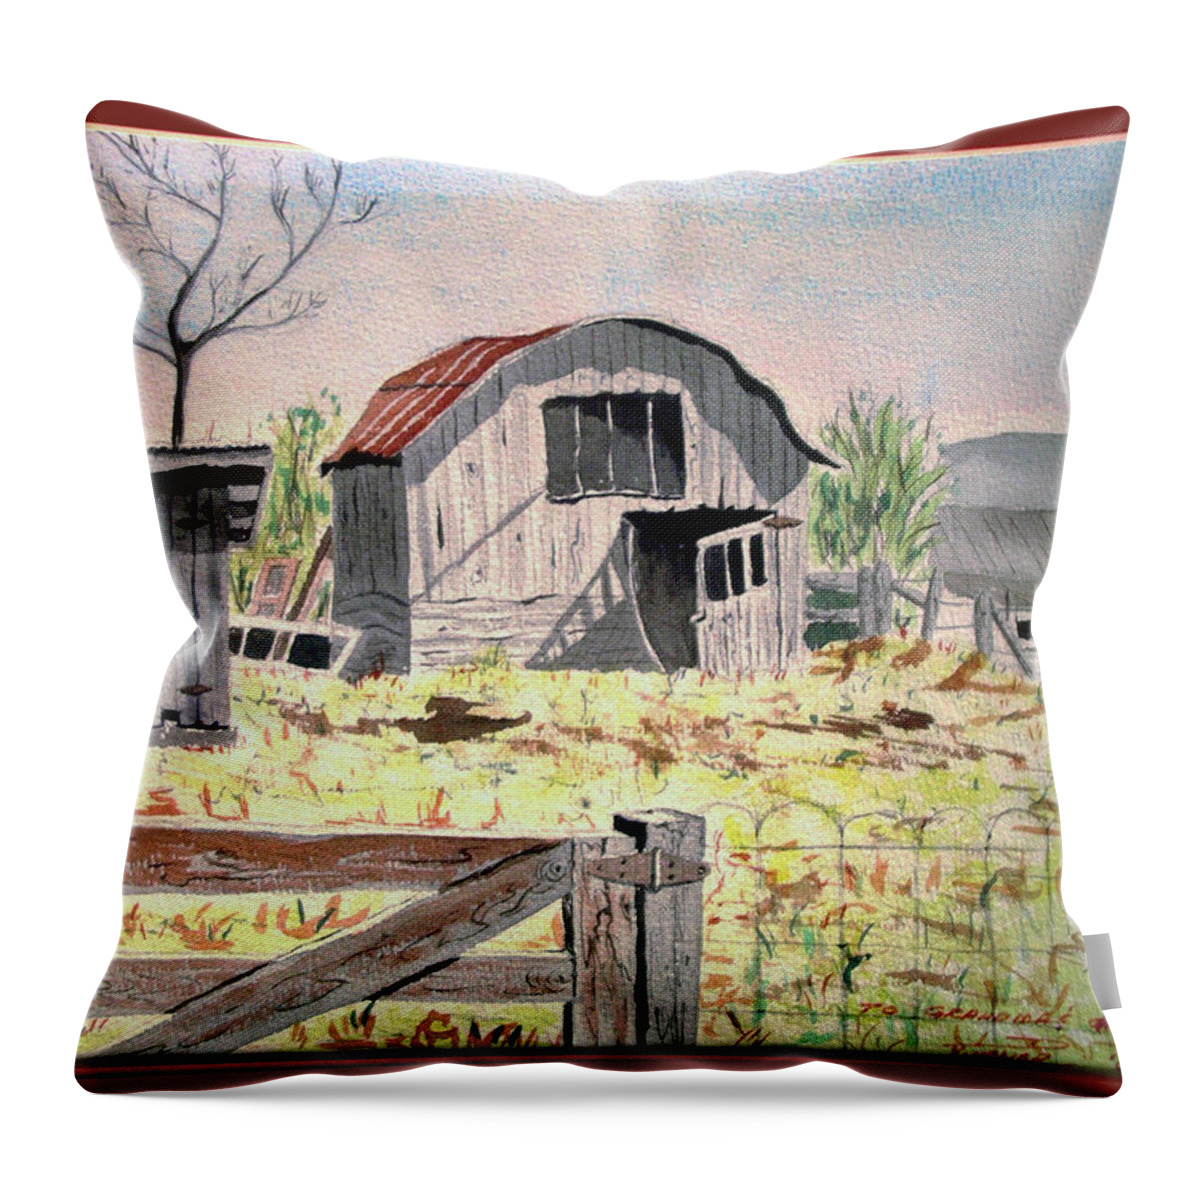 Grand Parents Throw Pillow featuring the painting Barn on Fisk Rd by Dale Turner